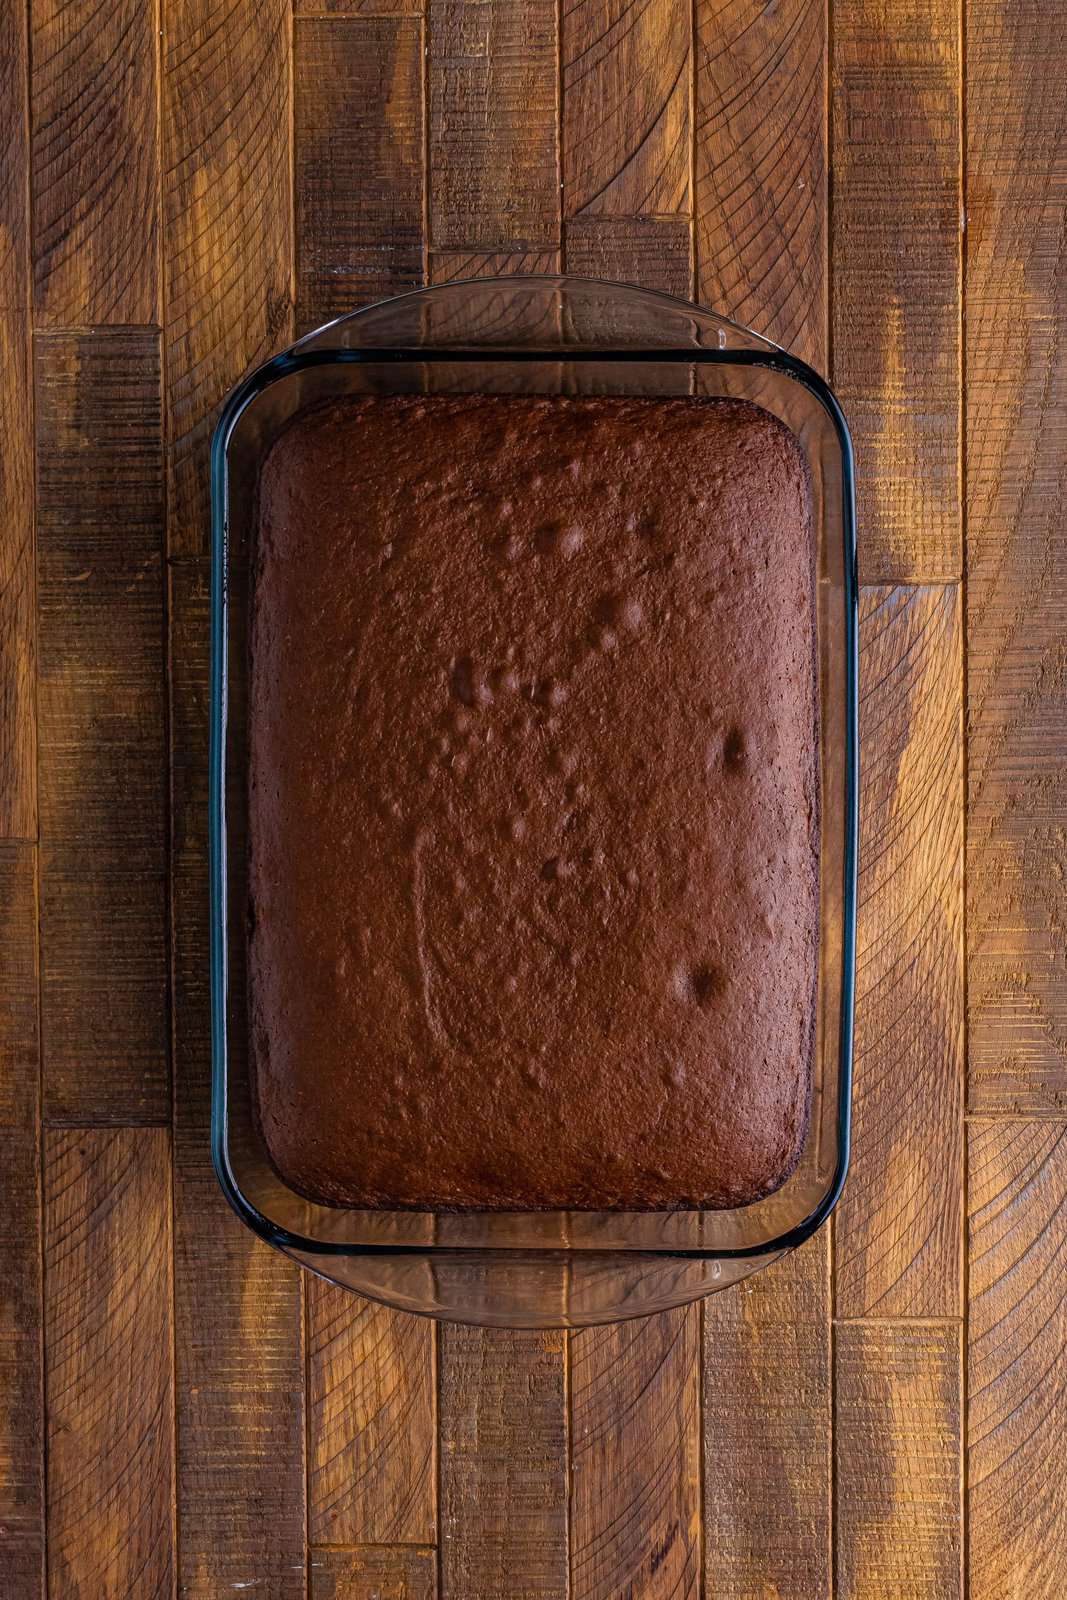 fully cooked chocolate cake in a clear baking dish.